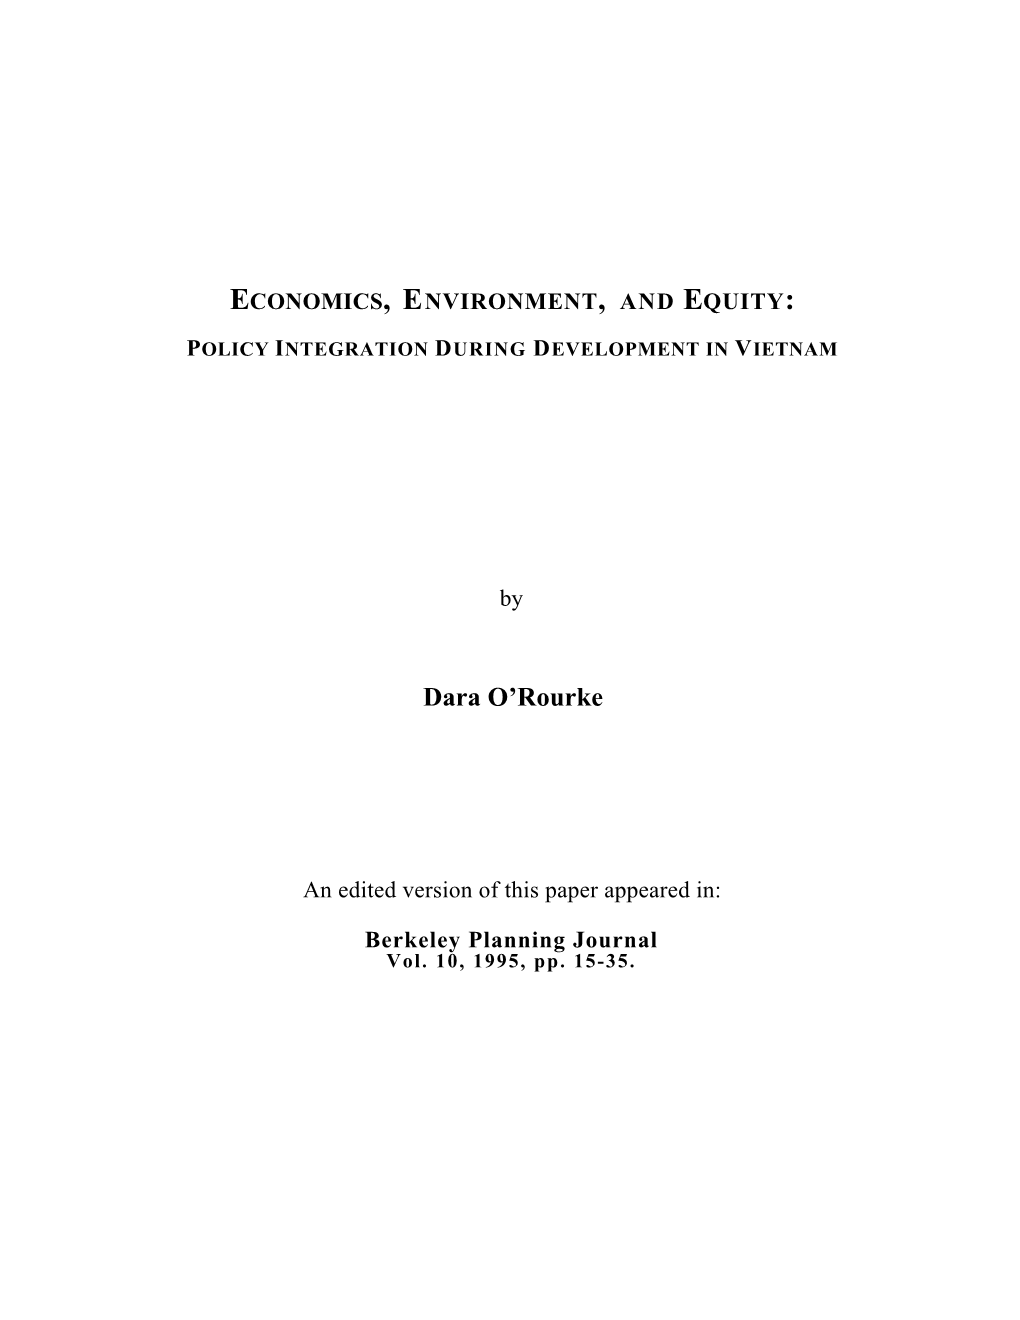 Economics, Environment and Equity: Policy Integration During Development in Vietnam